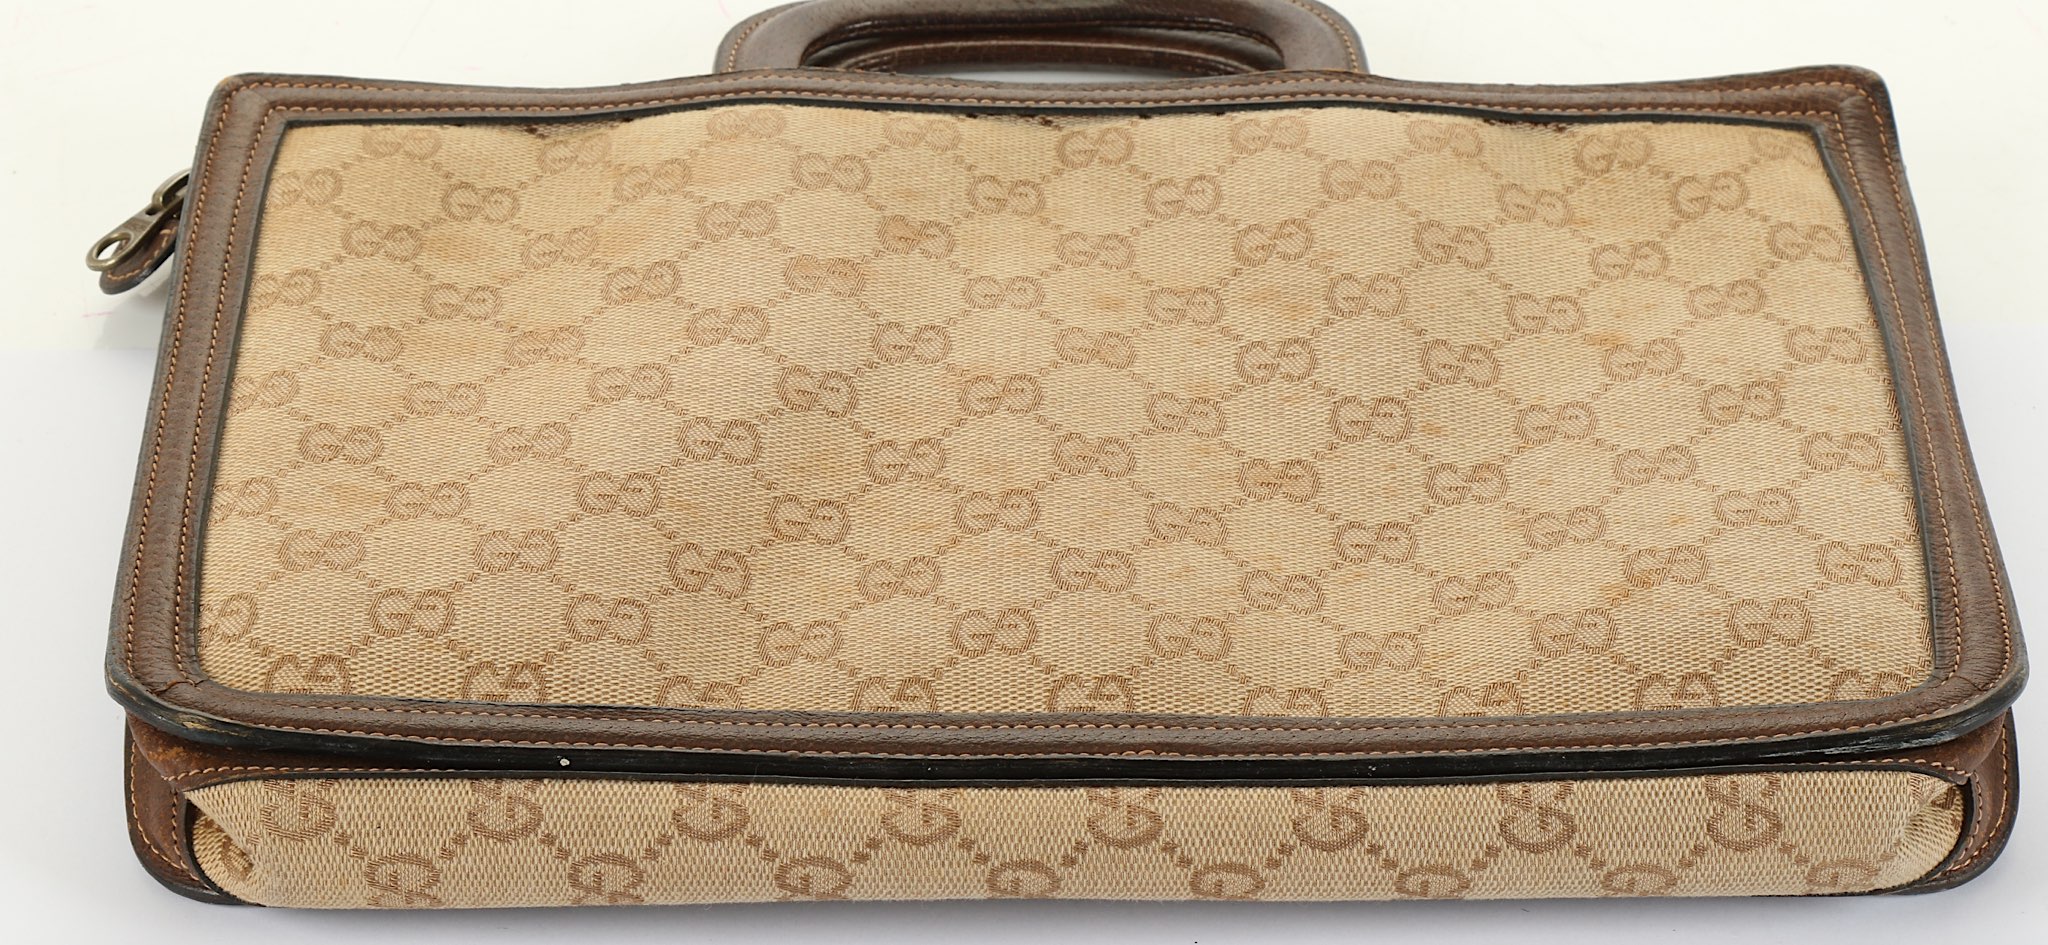 Gucci Document Holder, 1970s, brown monogram canva - Image 2 of 4